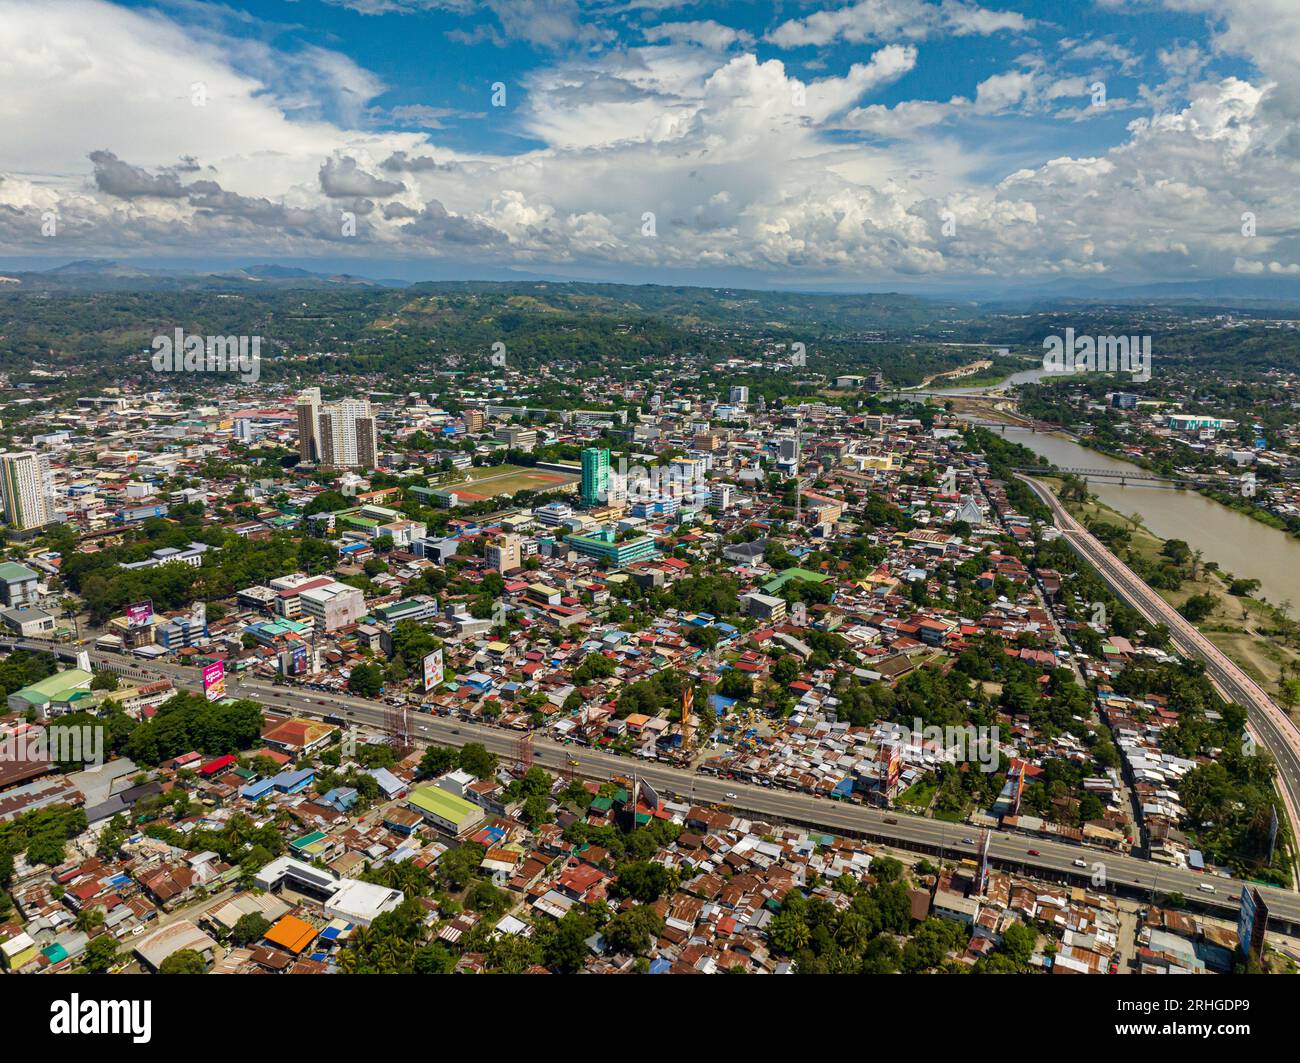 Residential area in Cagayan de Oro City, buildings ar riverside. Blue sky and clouds. Mindanao, Philippines. Stock Photo